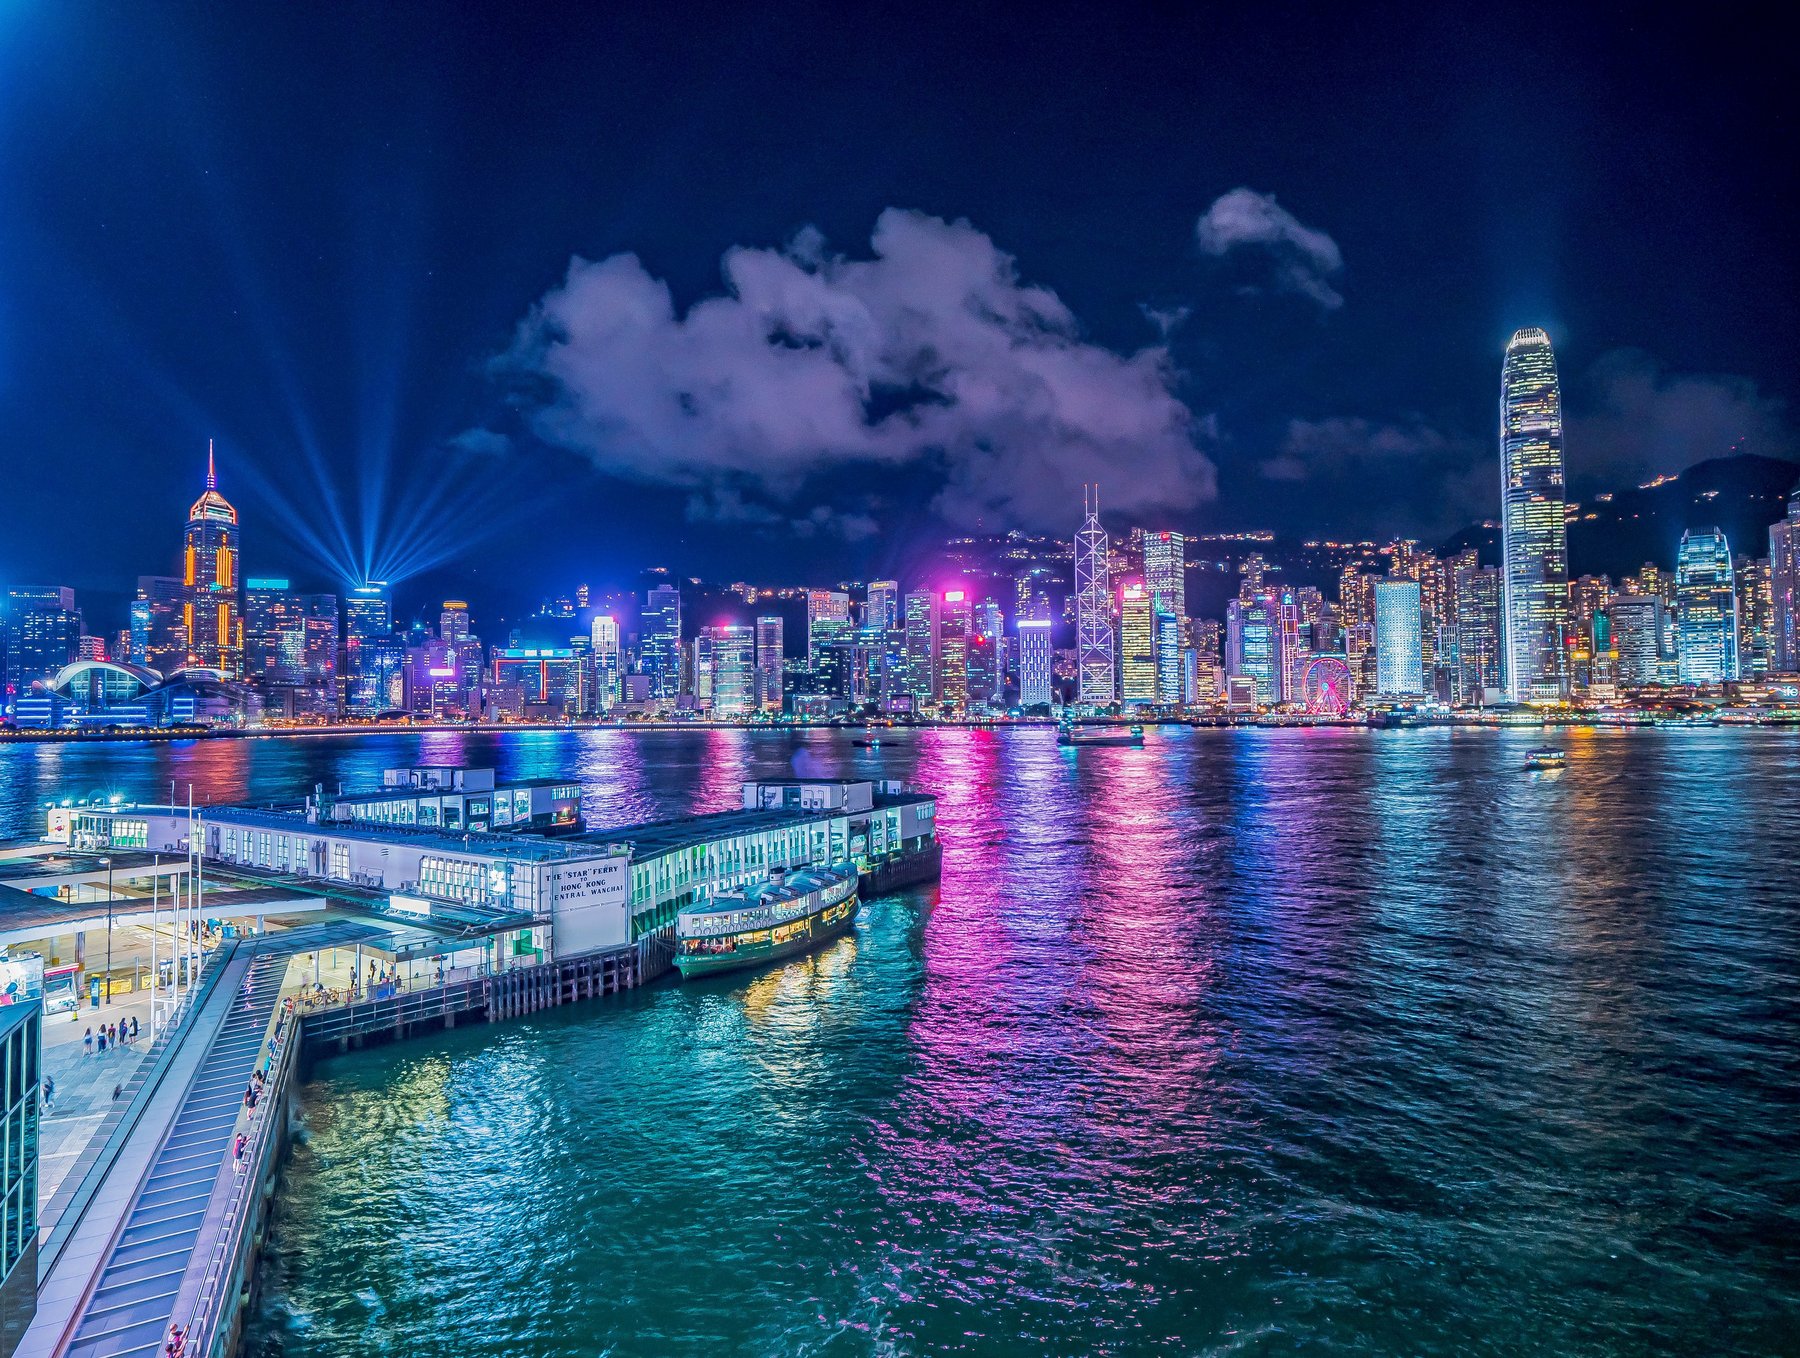 Hong Kong remains the most expensive location in Asia for business